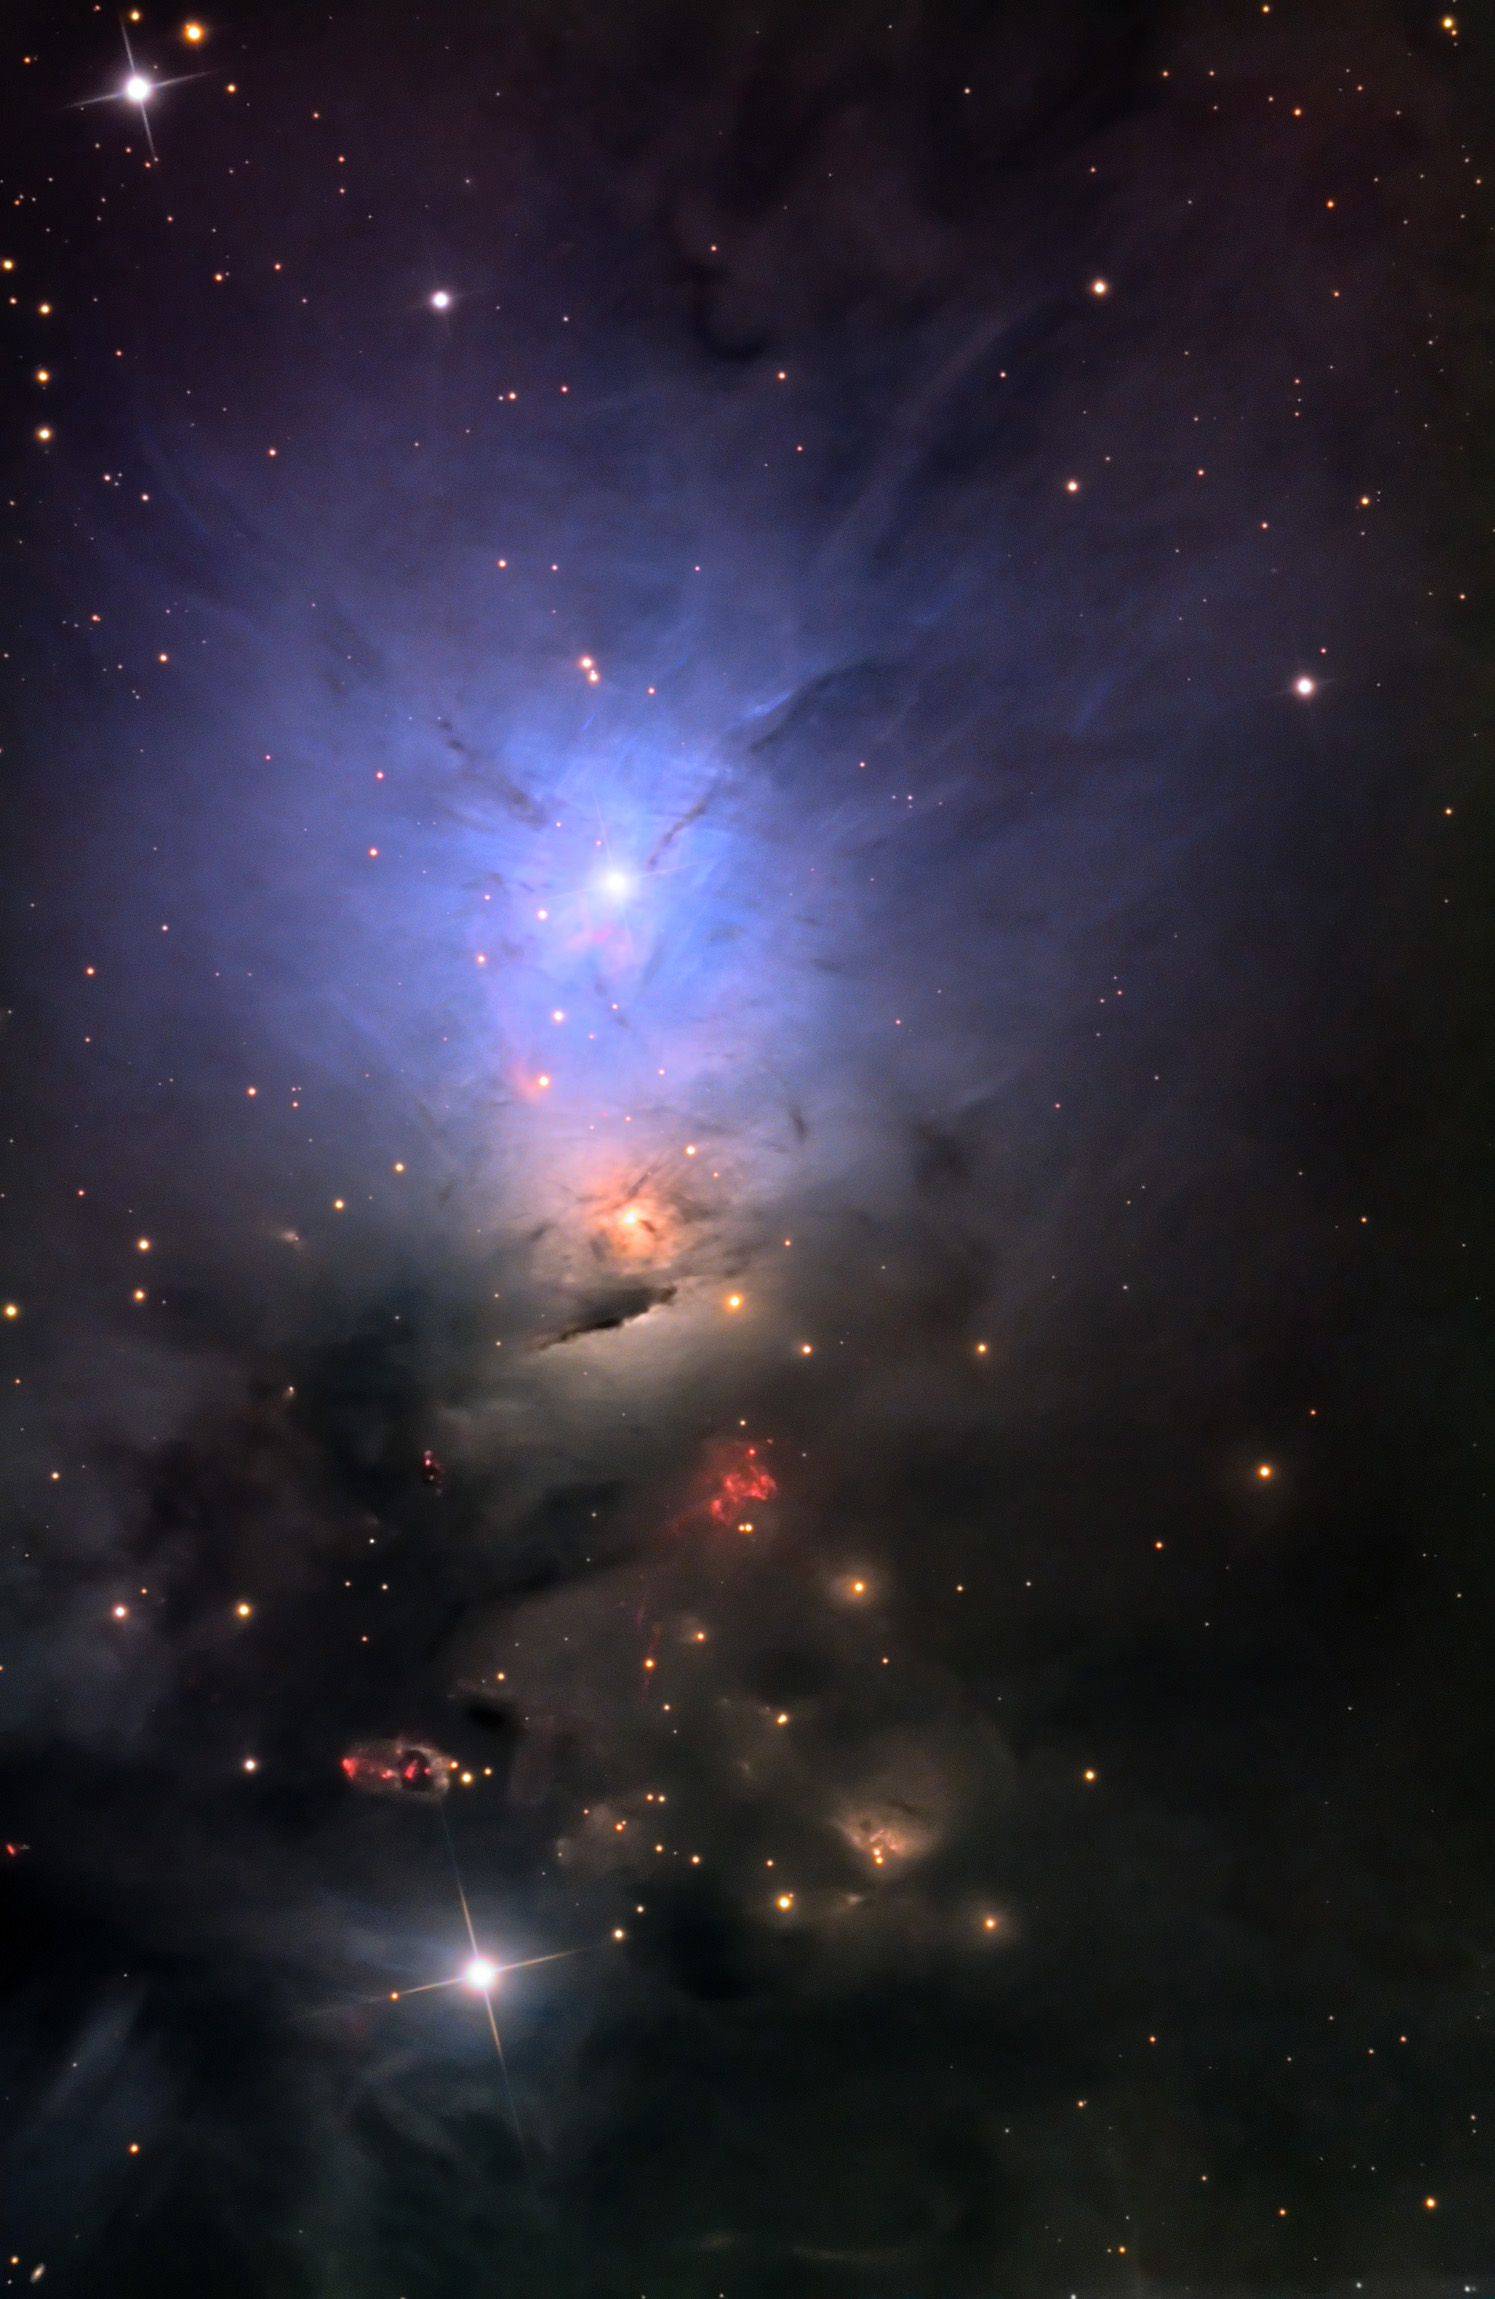 Reflection Nebula NGC 1333 - Click on this image to return to the smaller version of the image